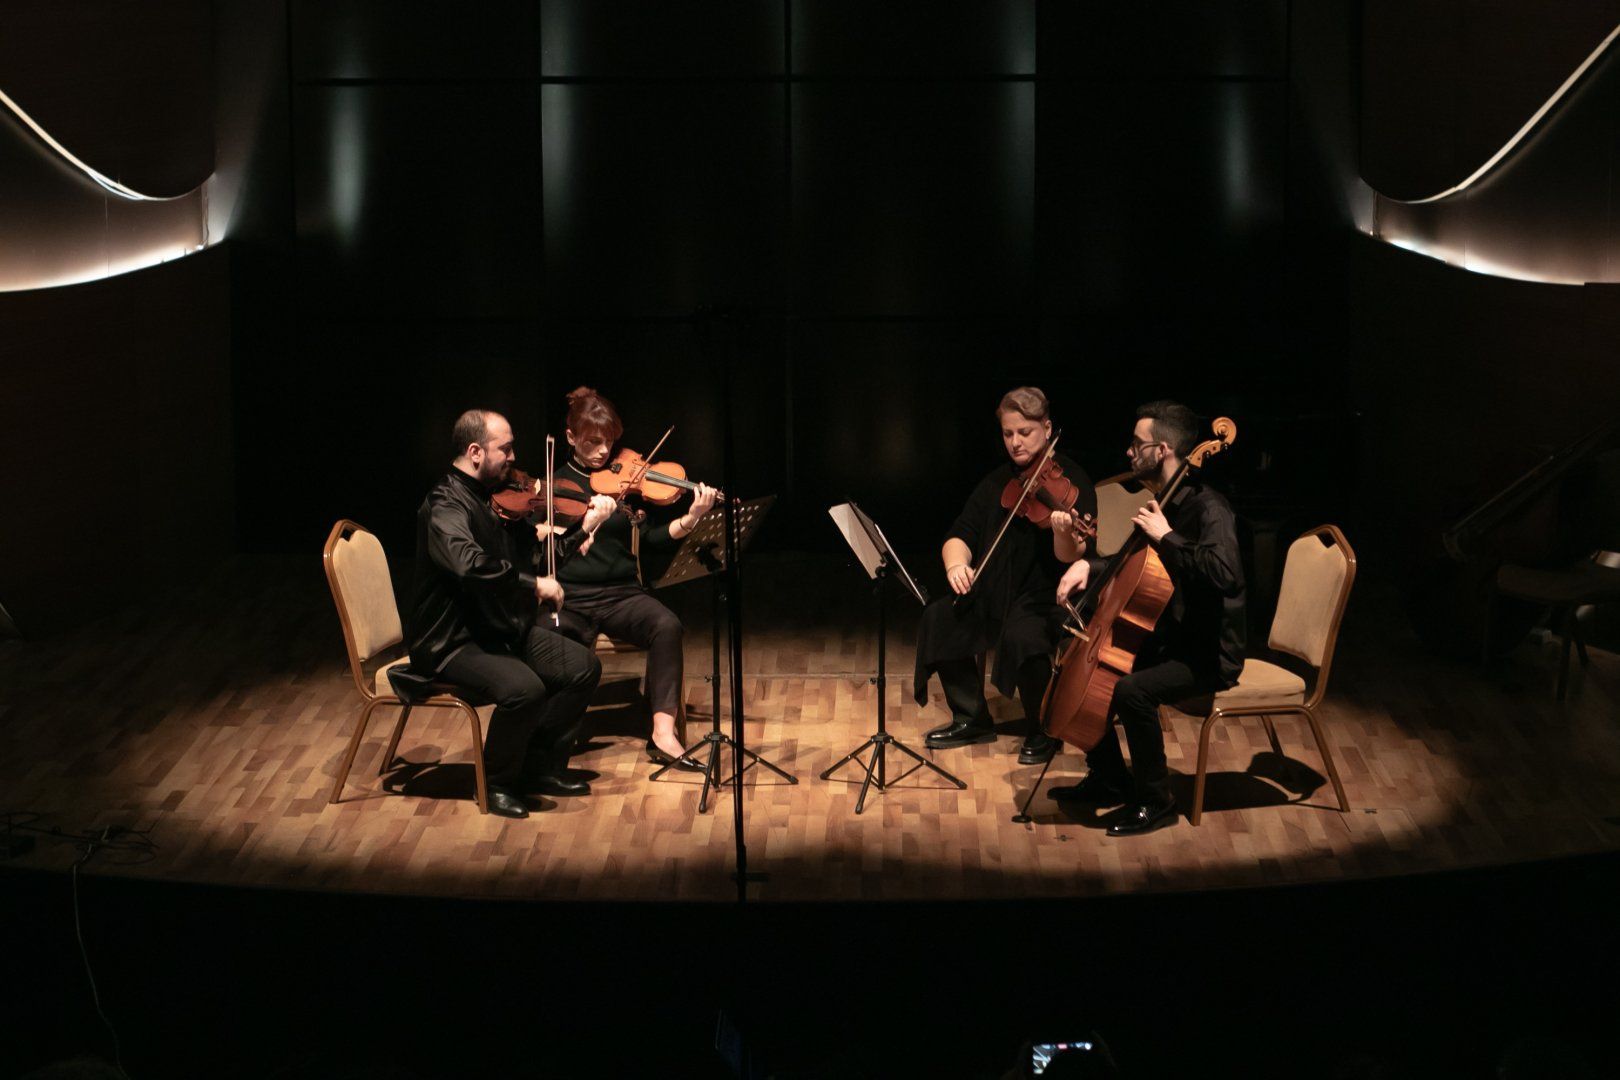 Cadenza Contemporary Orchestra thrills lovers of classical music [PHOTOS]